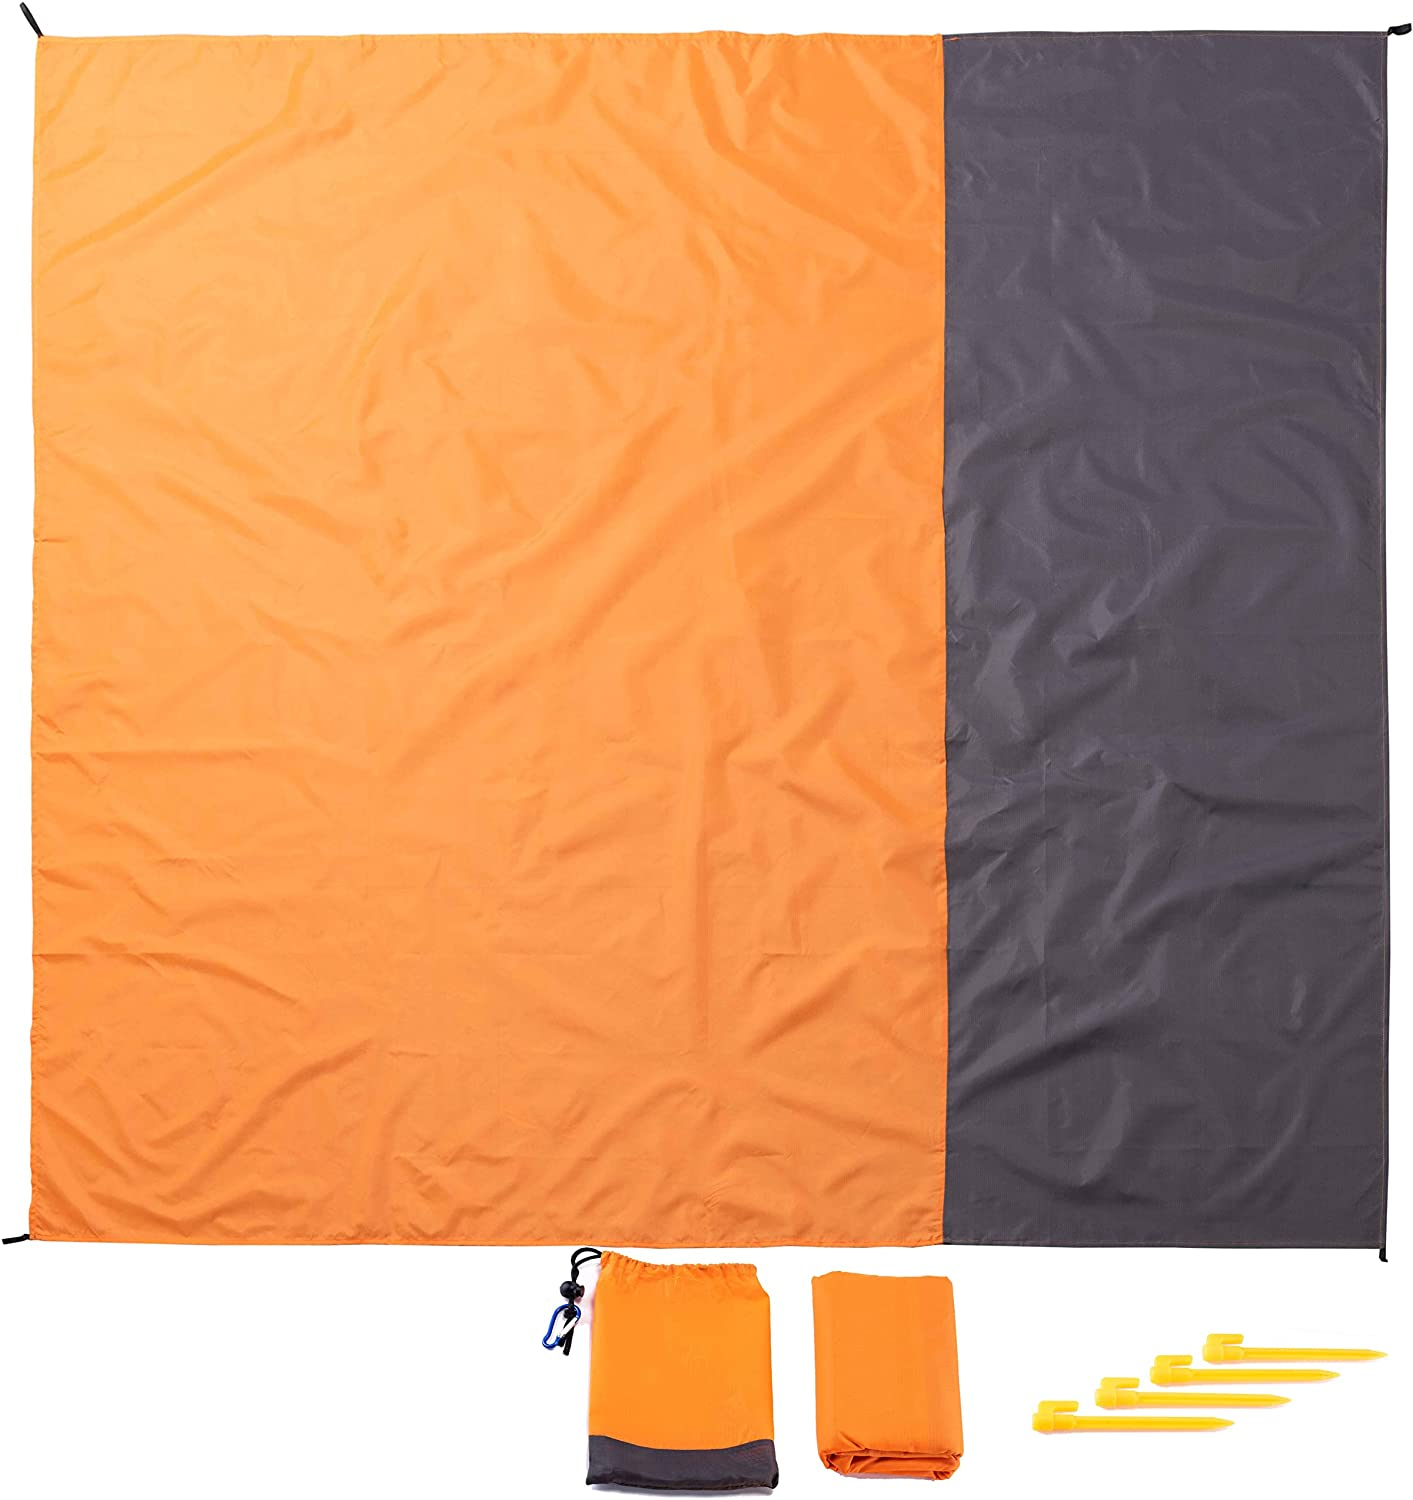 14. All-purpose outing blanket